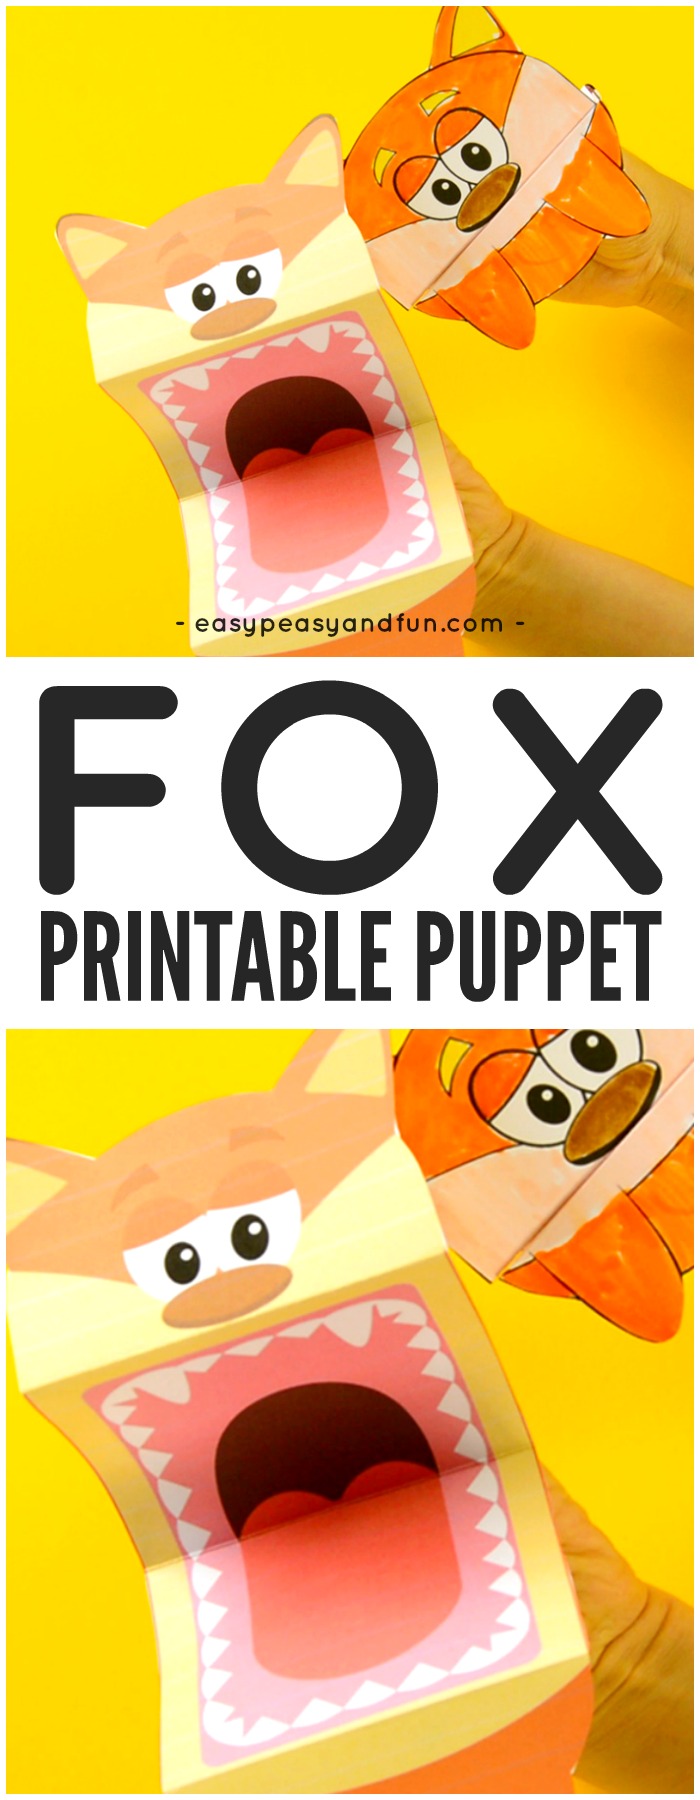 Free printable fox puppet crafts for kids to make and play